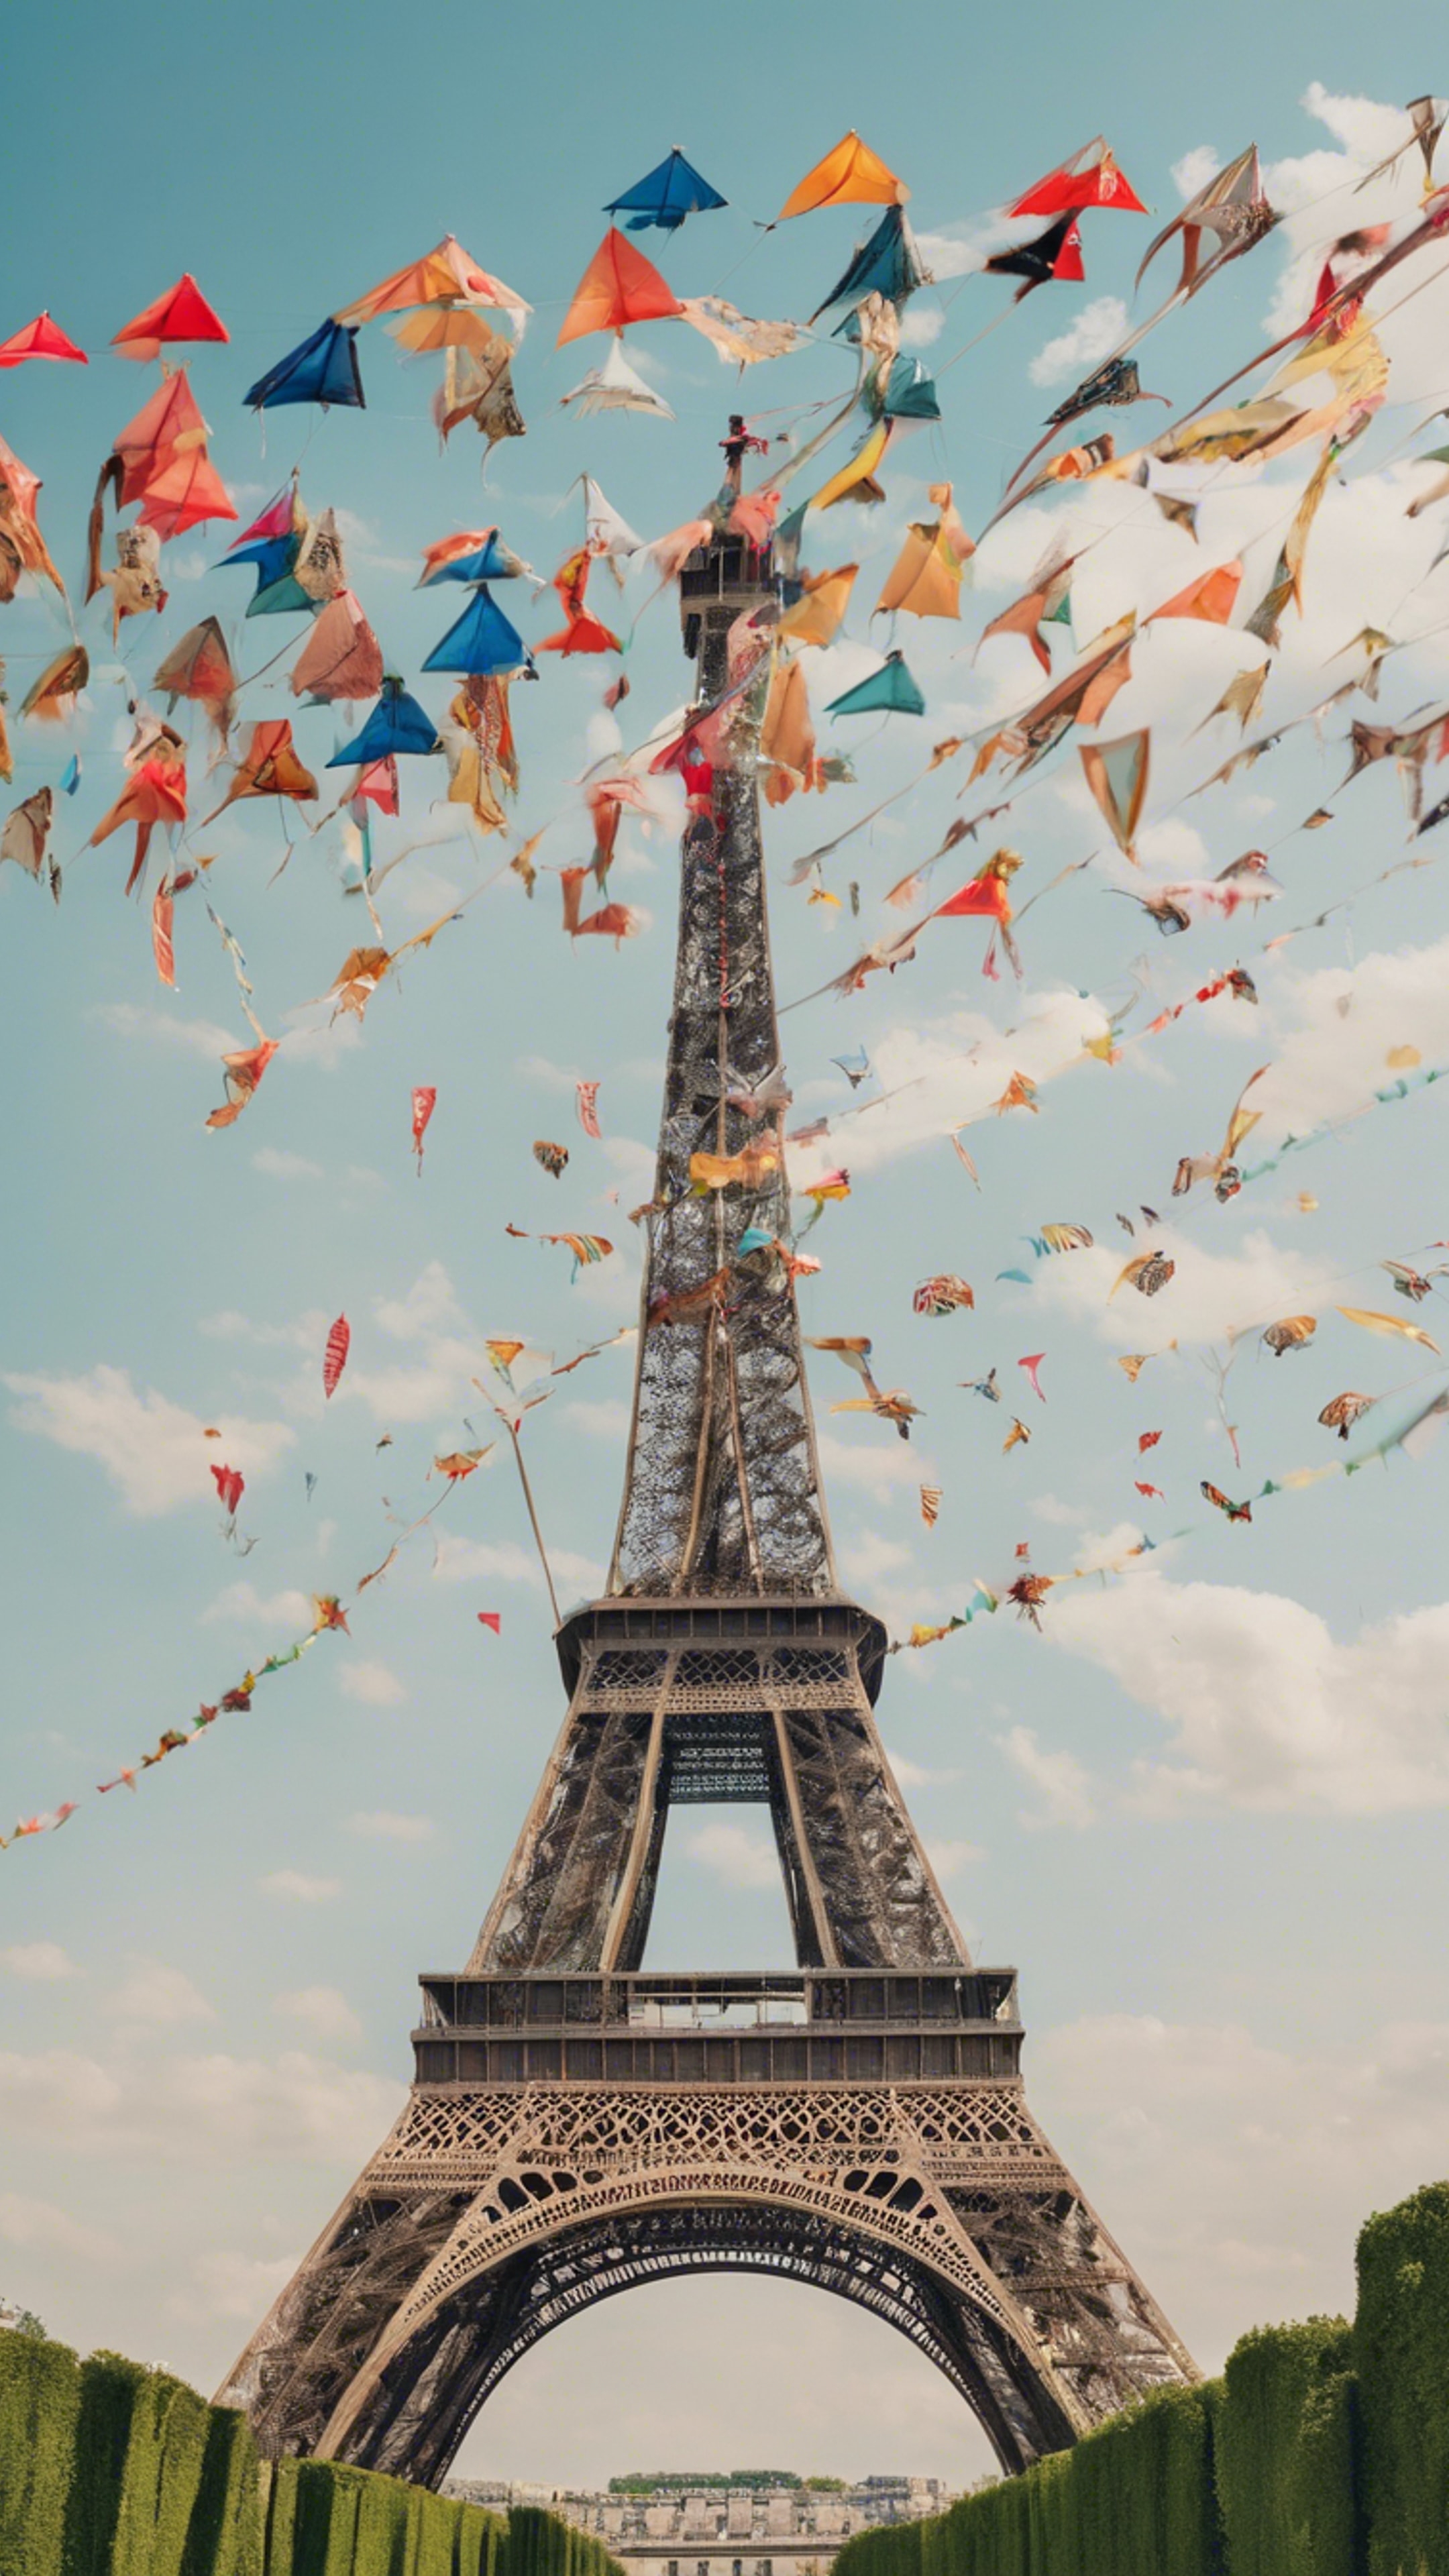 Numerous colorful kites flying around the Eiffel Tower on a breezy summer day. Tapet[13c5a5af918a46f7995e]